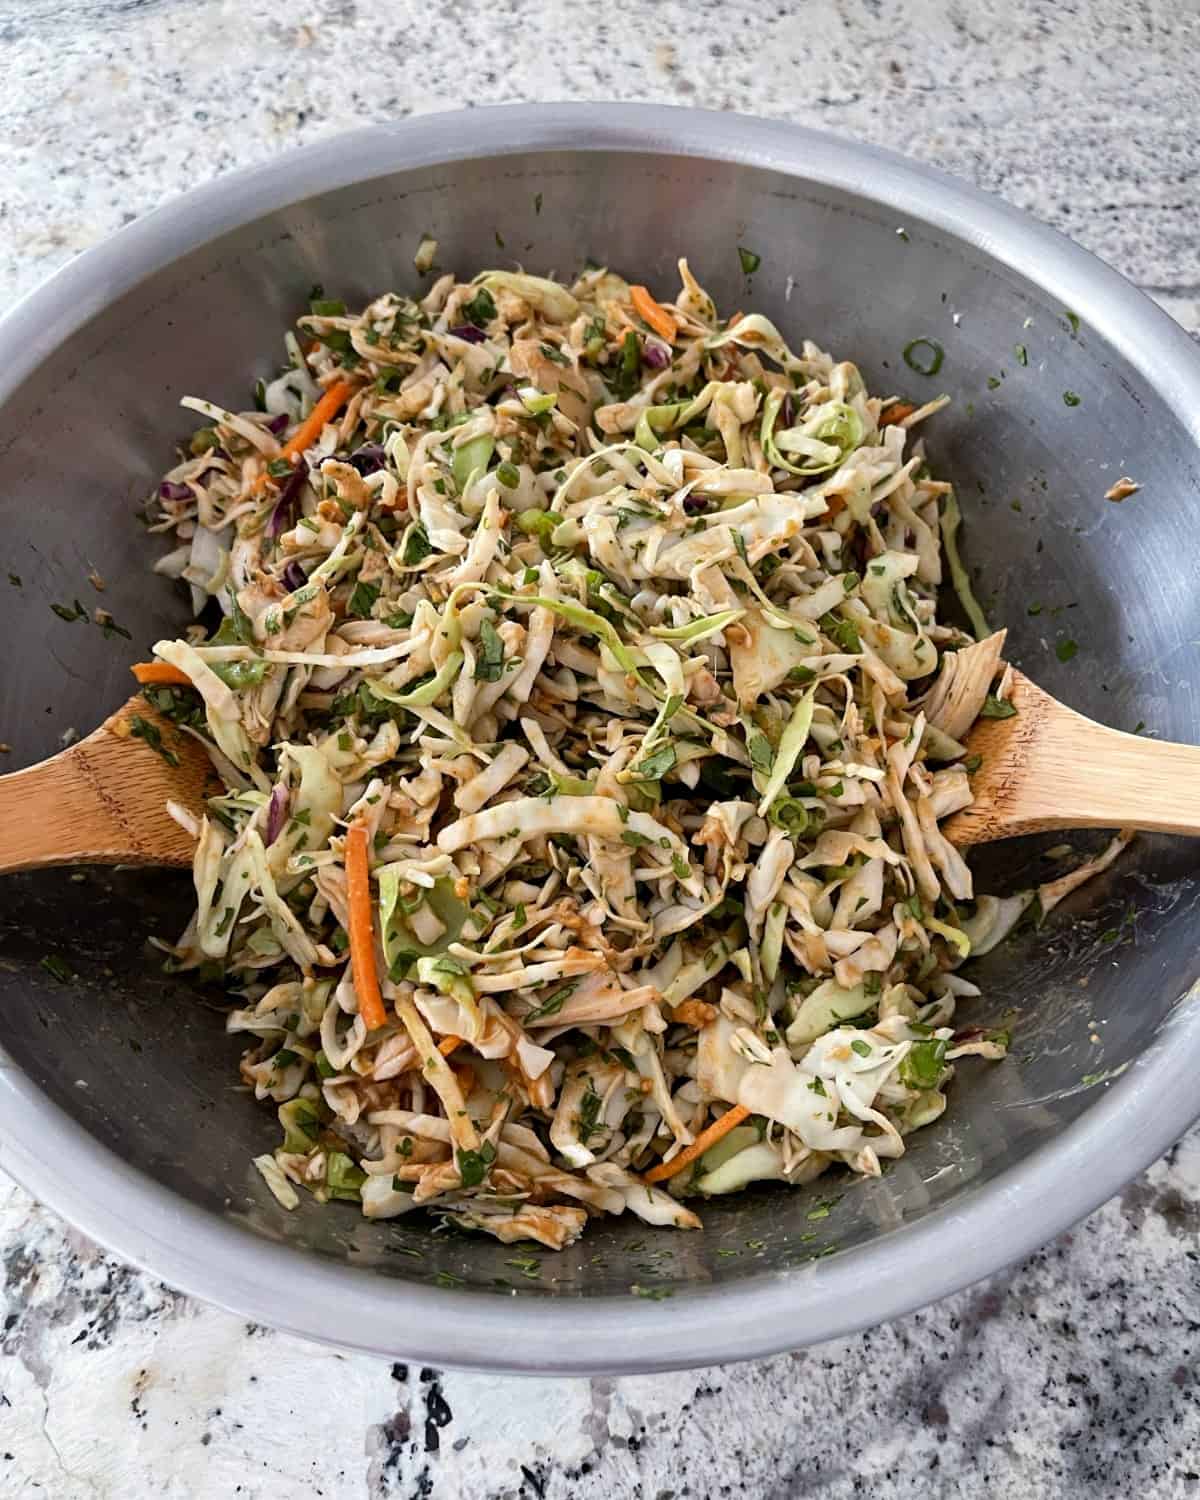 Toss the Thai Chicken Coleslaw in a large bowl with two wooden spoons.